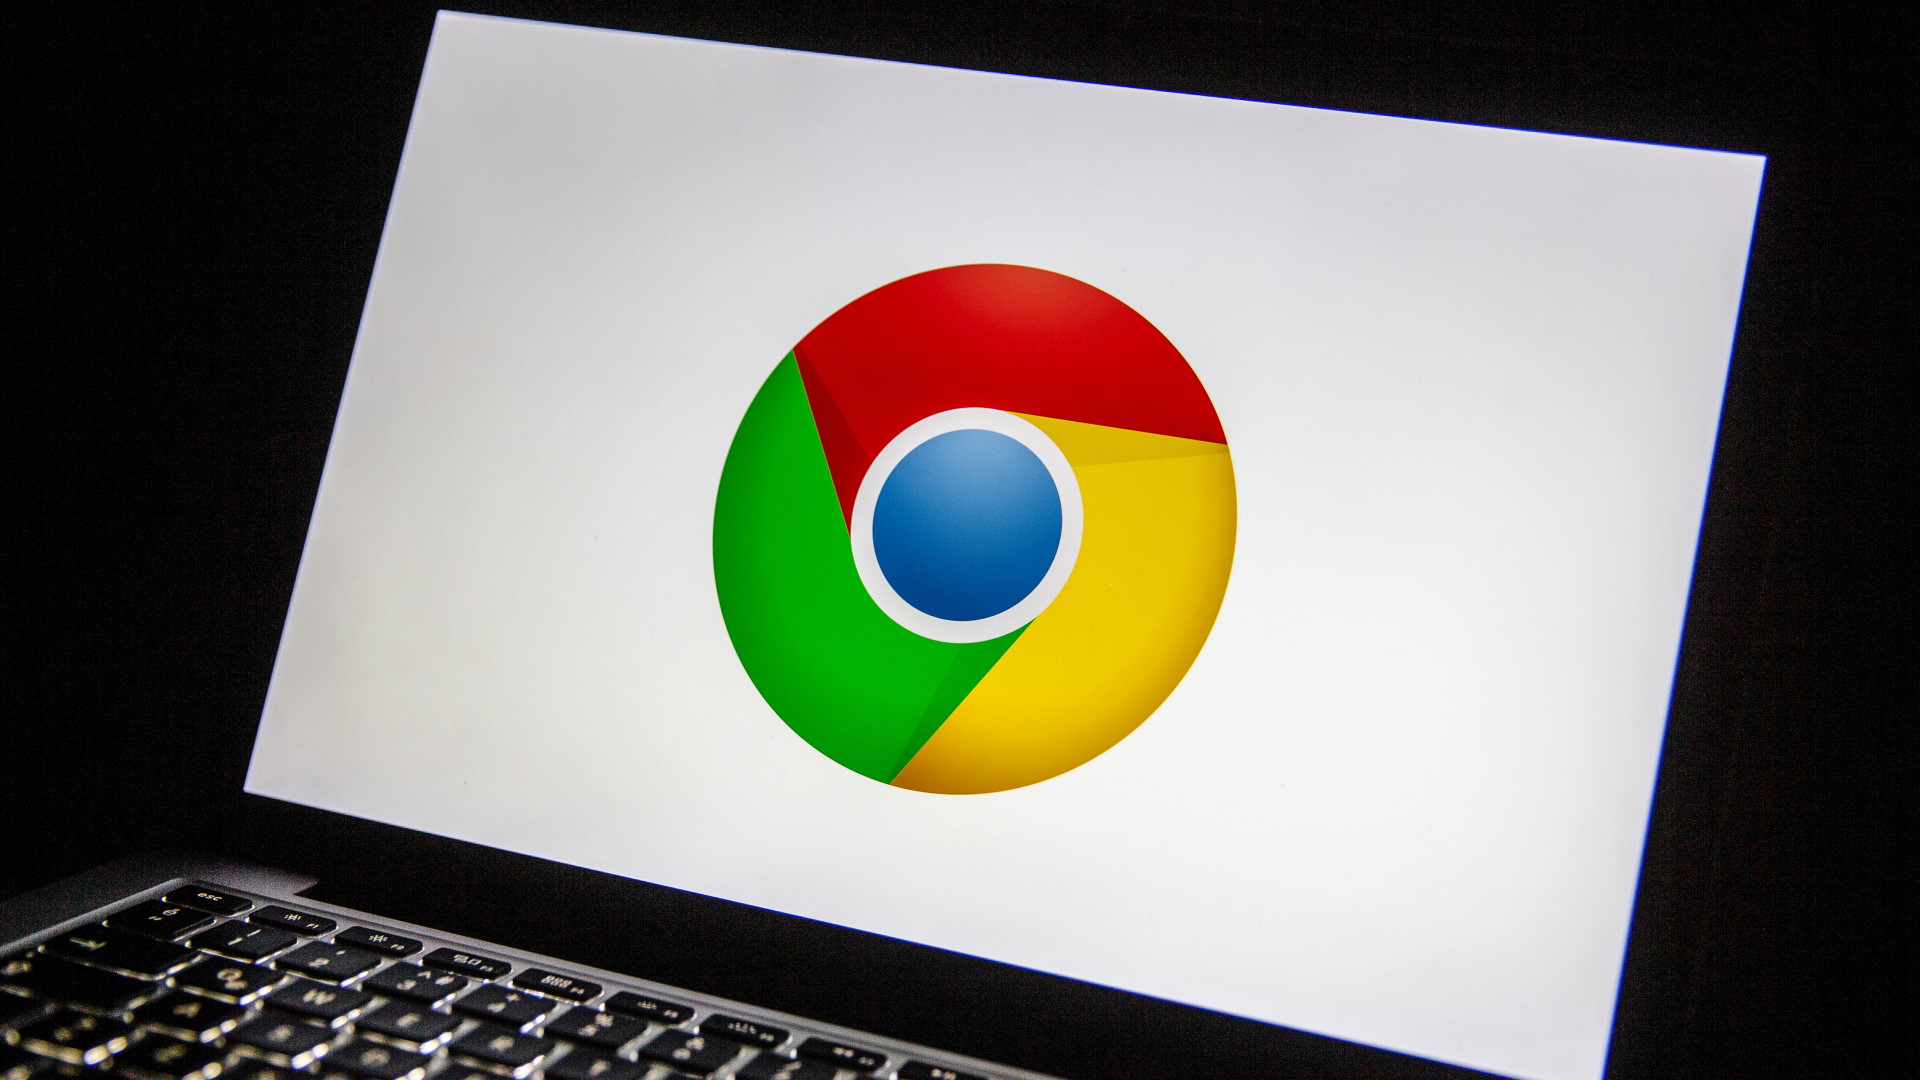  Chrome's new search tool groups your history into categories 